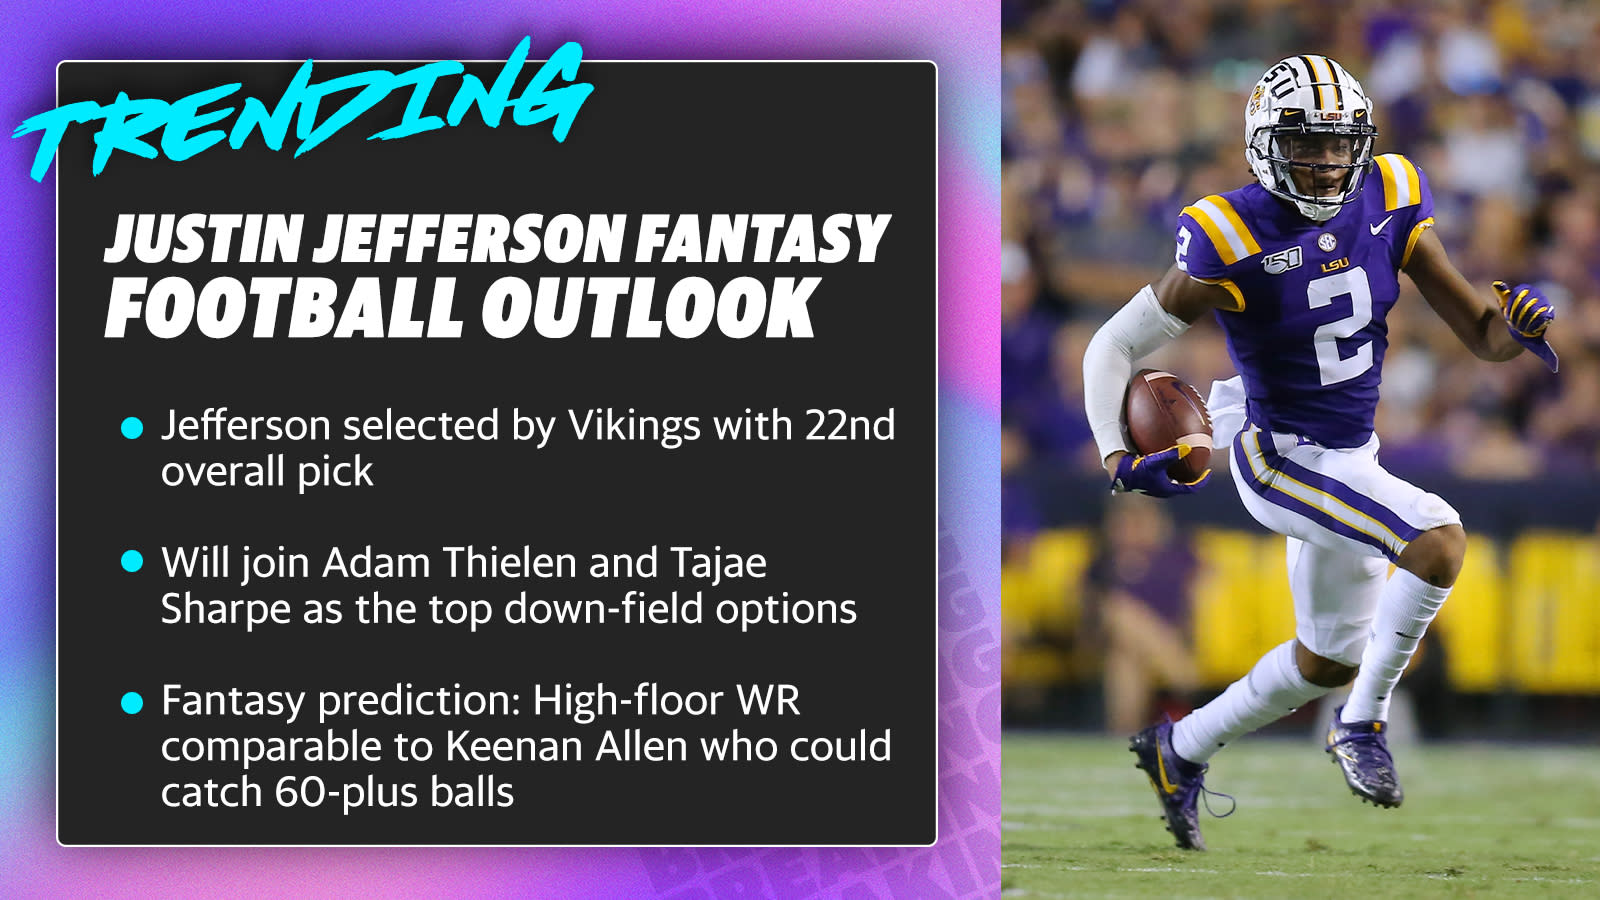 Should you select Justin Jefferson in fantasy drafts?